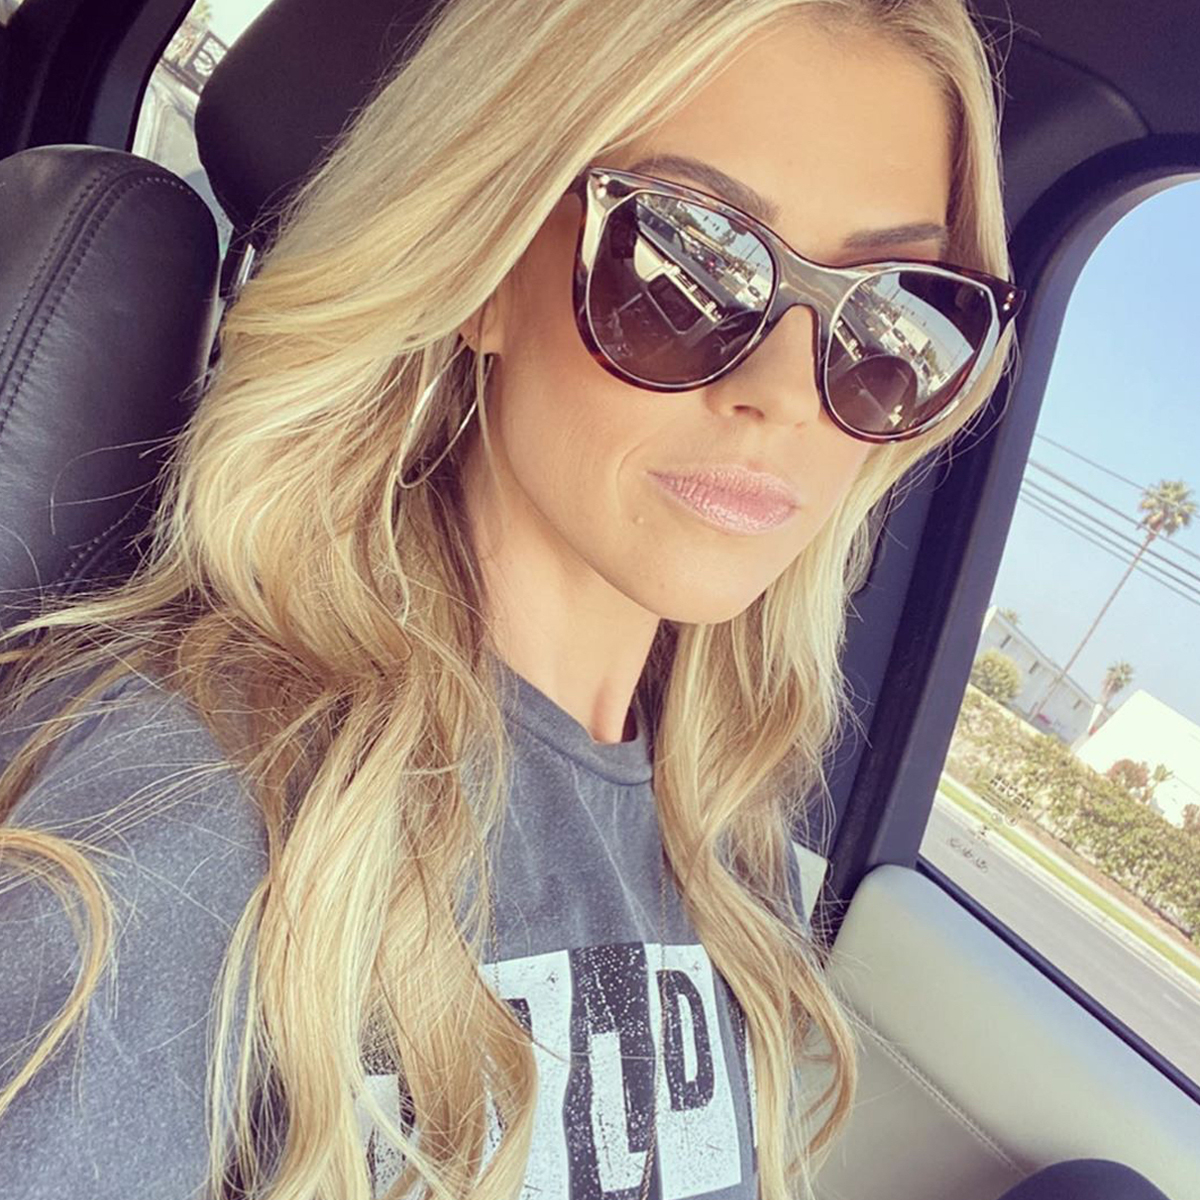 Christina Anstead responds to fans’ concerns that she is’ really skinny ‘